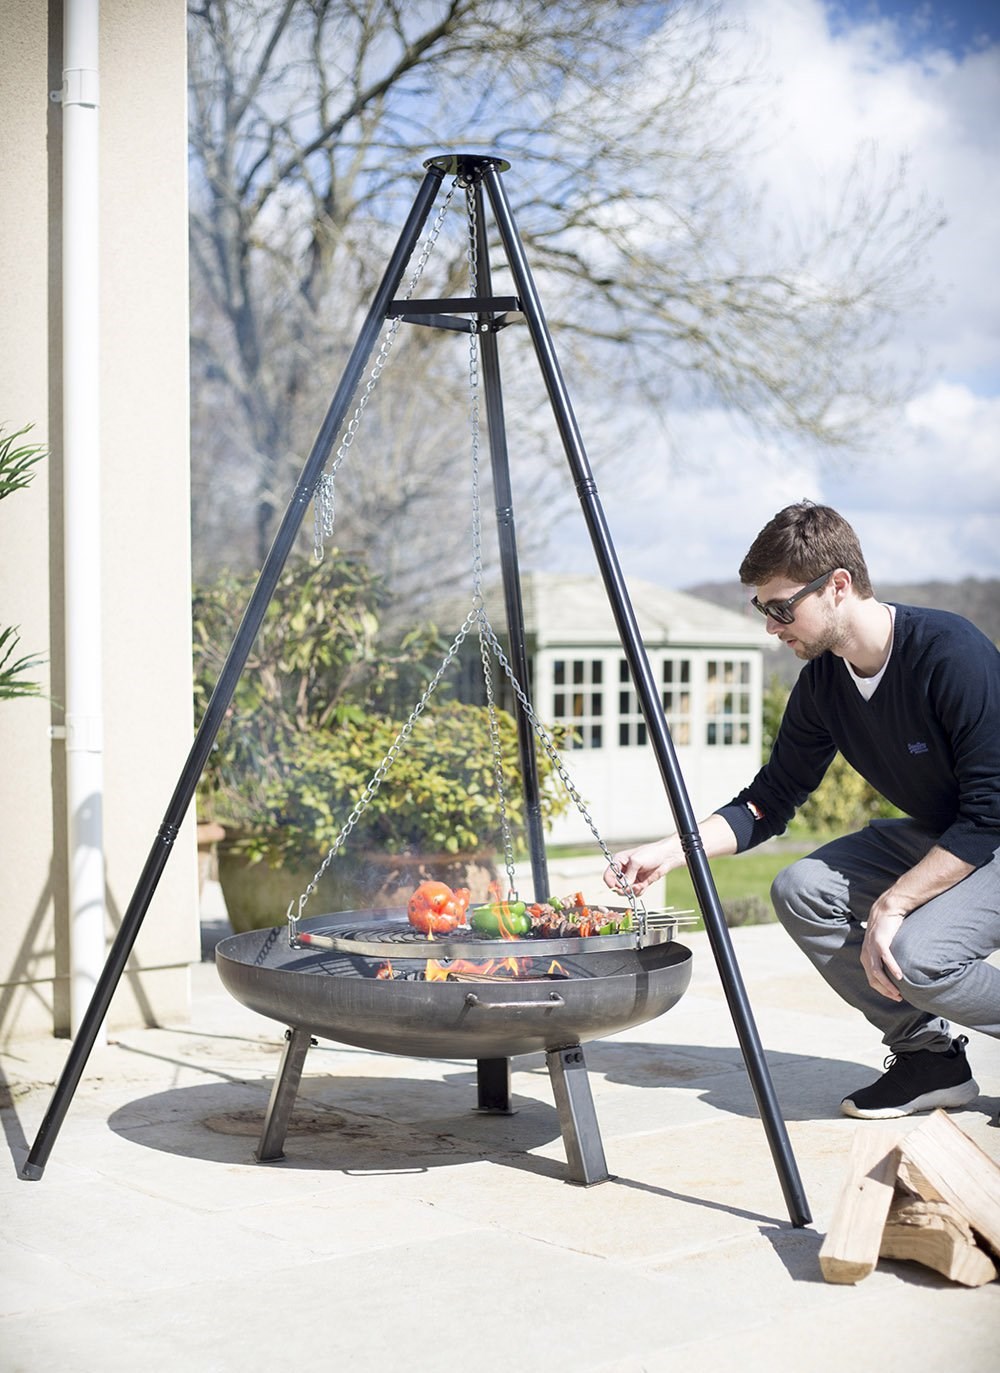 1.3m Steel Tripod with Hanging Cooking Grill by La Hacienda